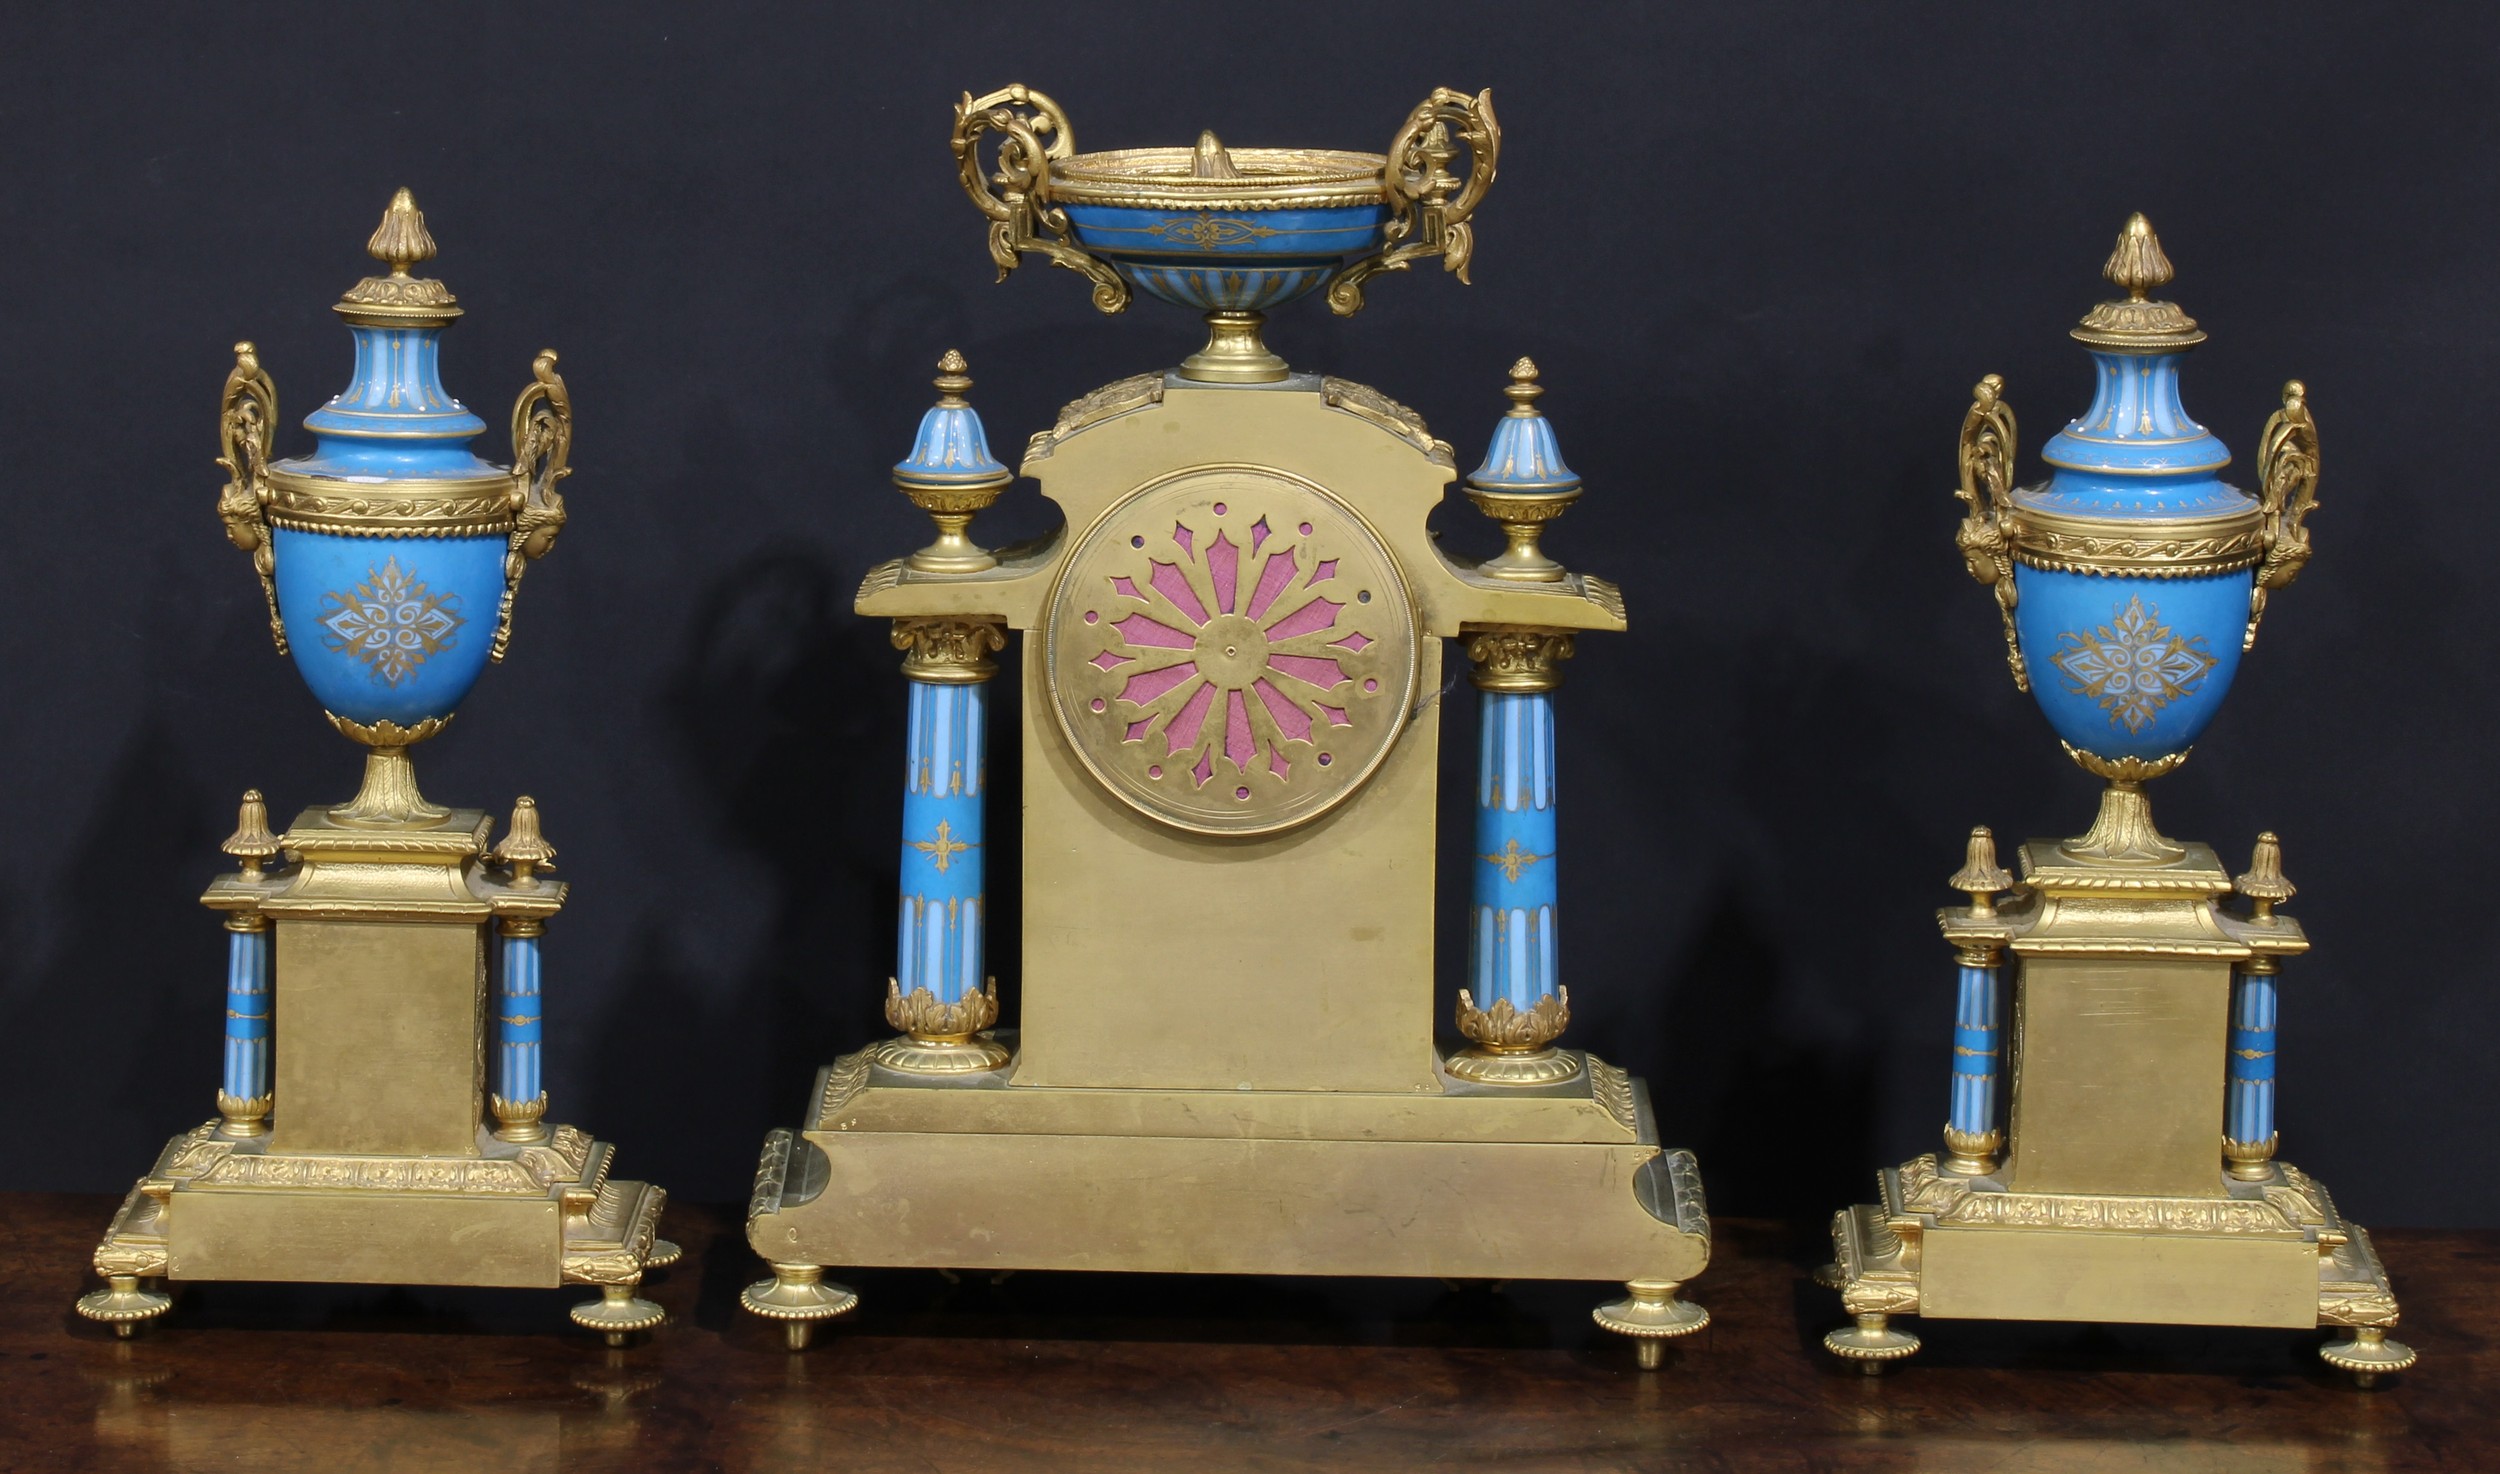 A 19th century French ormolu and porcelain clock garniature, in the Louis XVI Revival taste, 9cm - Image 4 of 4